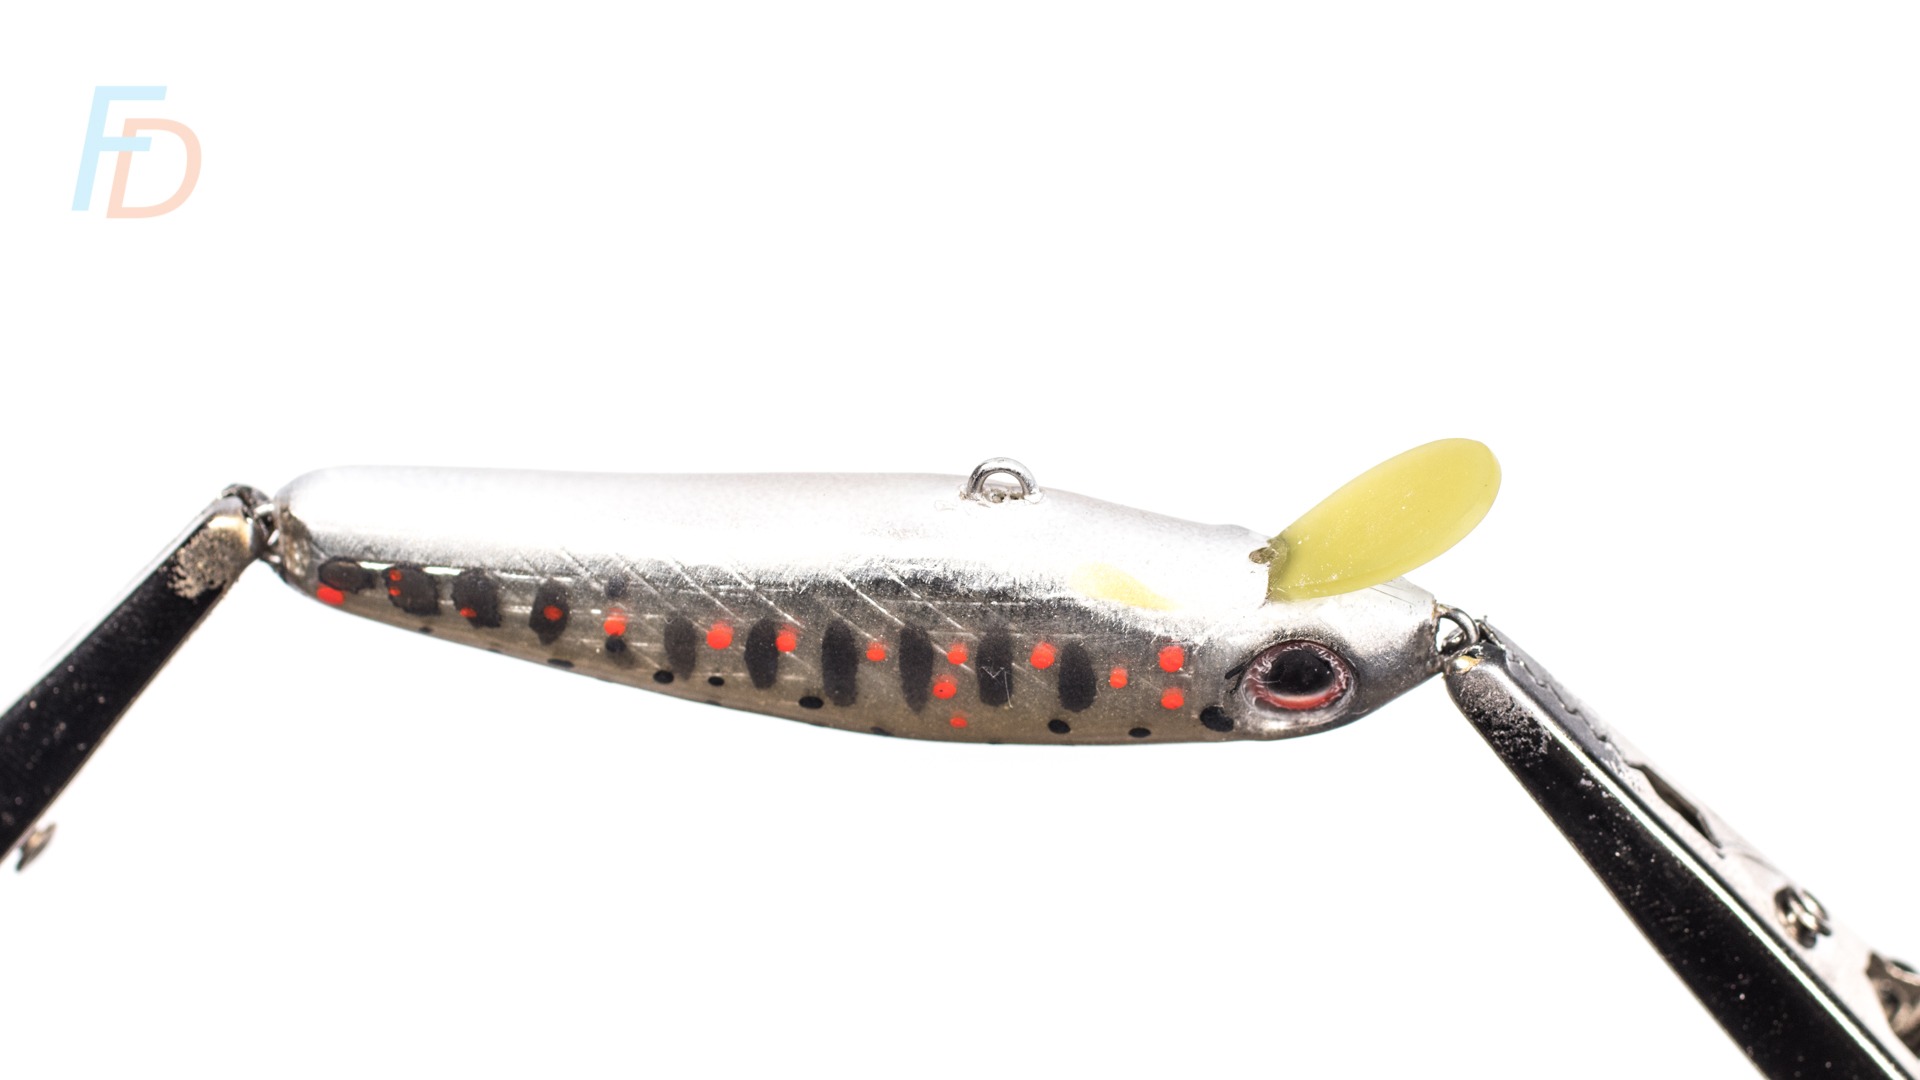 Making Your Own Homemade Fishing Lures